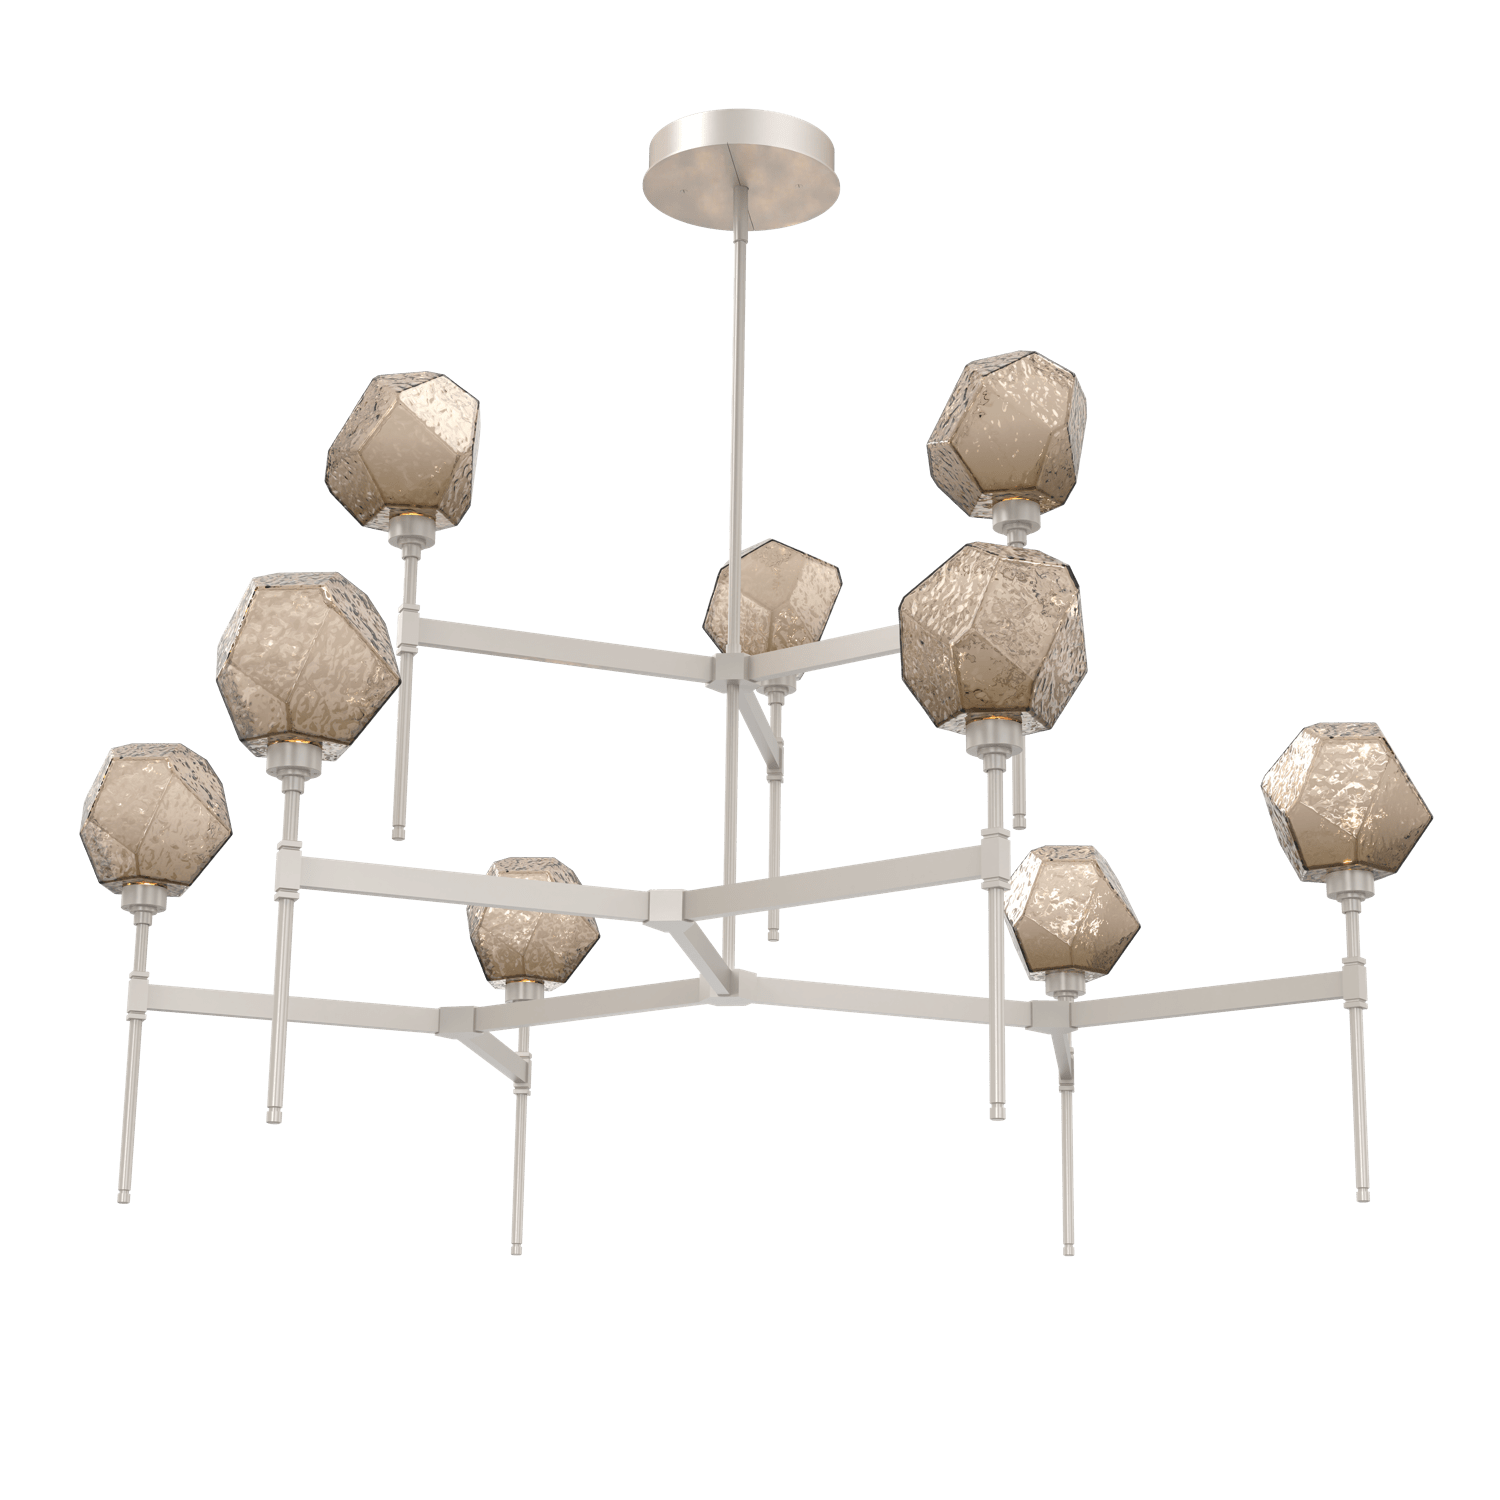 CHB0039-55-BS-B-Hammerton-Studio-Gem-round-two-tier-belvedere-chandelier-with-metallic-beige-silver-finish-and-bronze-blown-glass-shades-and-LED-lamping